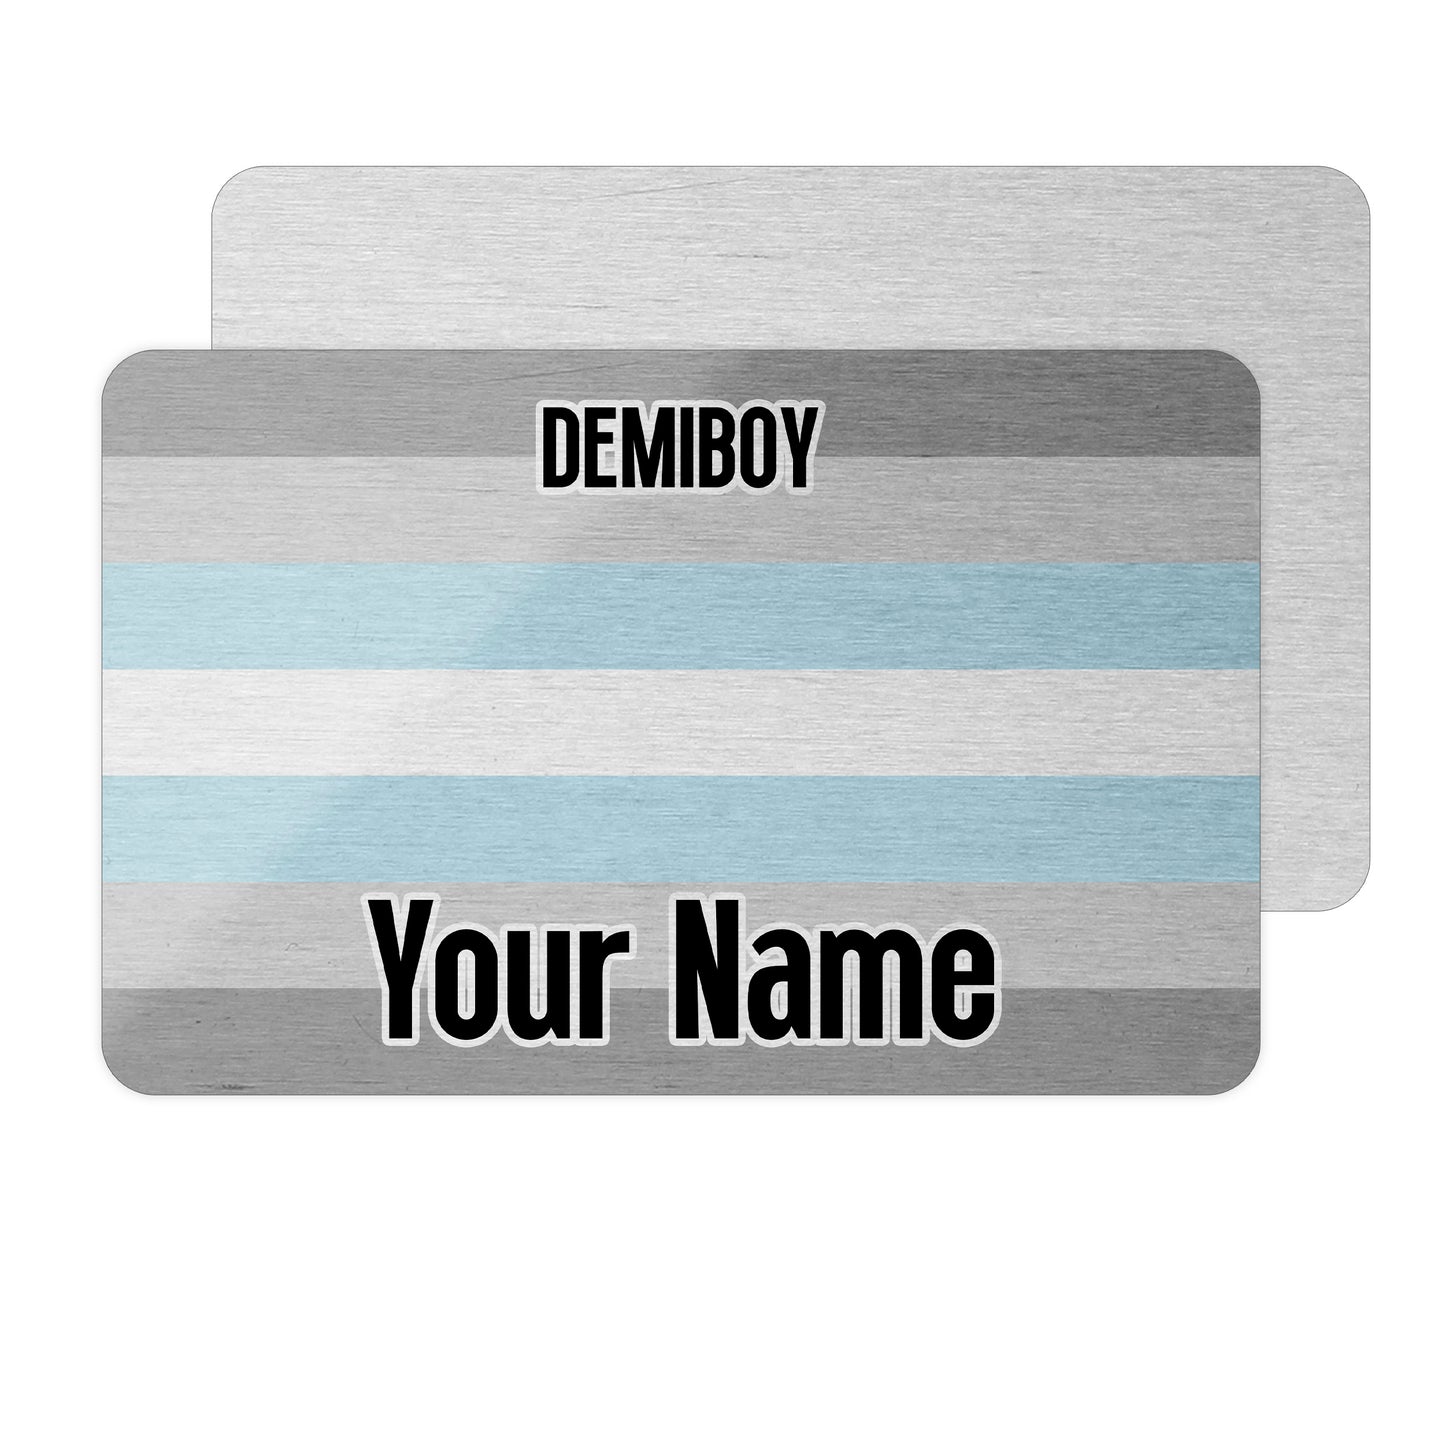 Aluminium wallet card personalised with your name and the demiboy pride flag